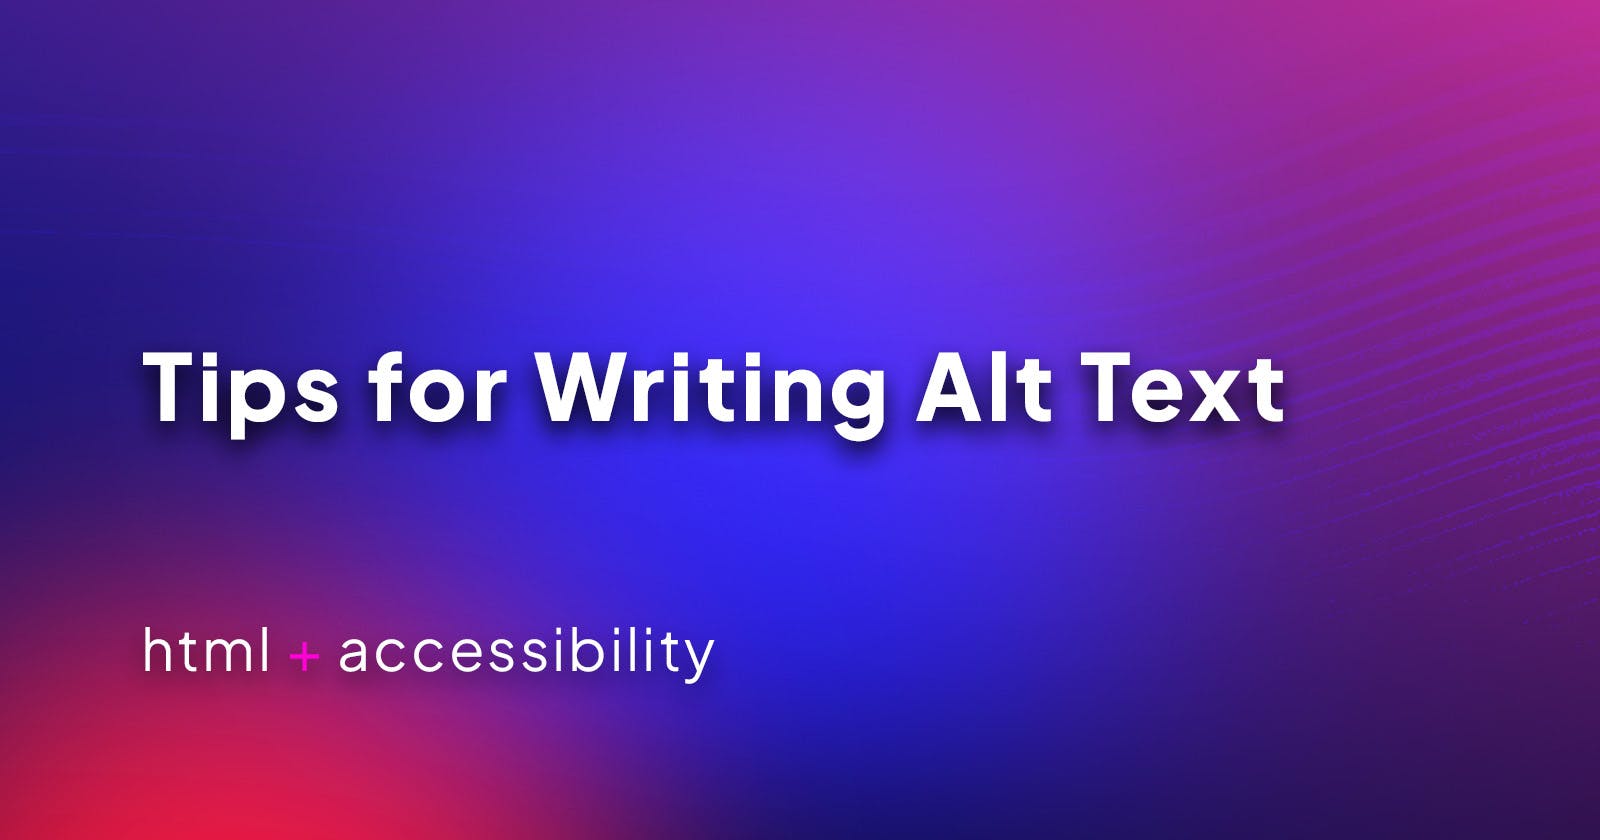 Tips for Writing Alt Text